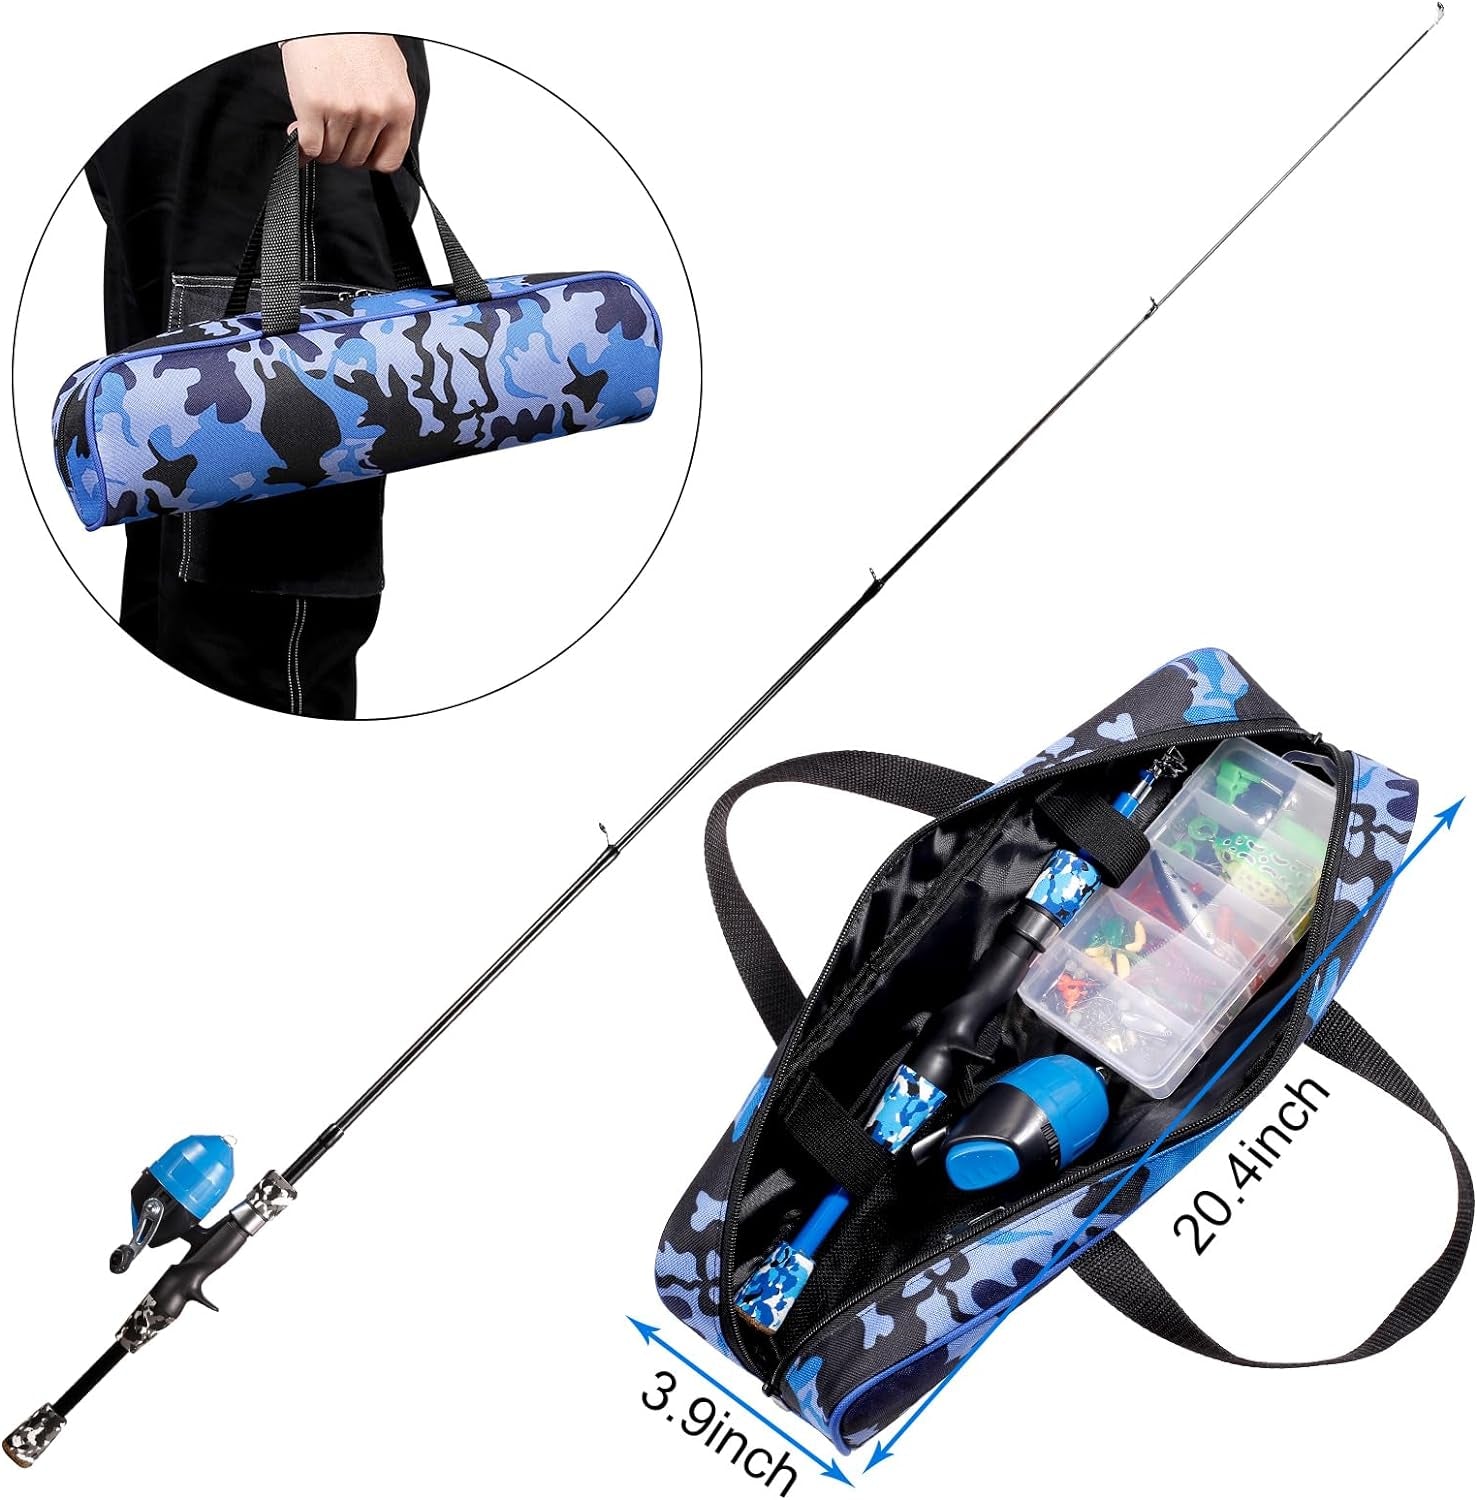 Kids Fishing Pole - Telescopic Fishing Rod and Reel Combo Kit - Fishing Gear, Fishing Lures, Carry on Bag, 70 Set Fully Fishing Equipment - for Boys, Girls, Youth